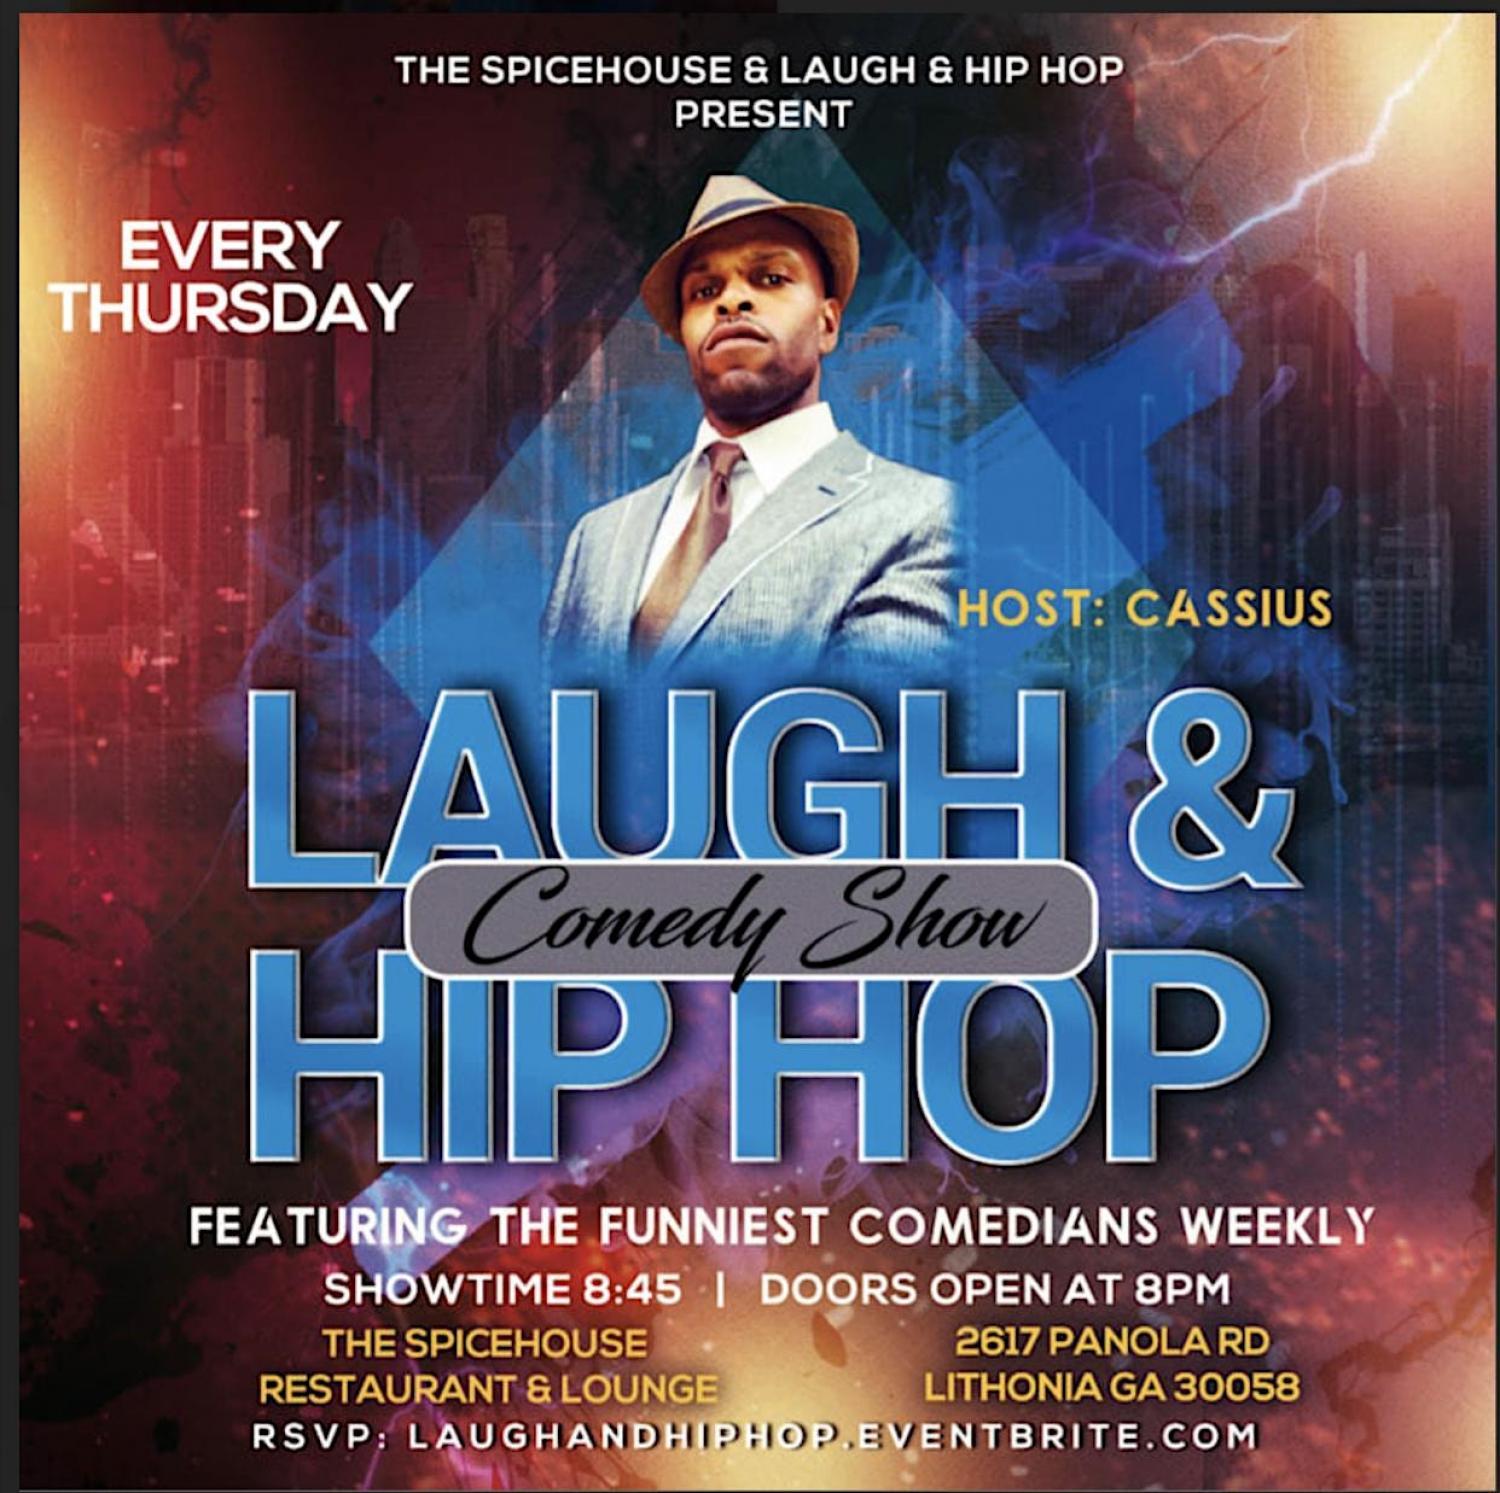 LAUGH & HIP HOP COMEDY SHOW at The Spicehouse
Thu Nov 24, 7:00 PM - Thu Nov 24, 10:00 PM
in 37 days